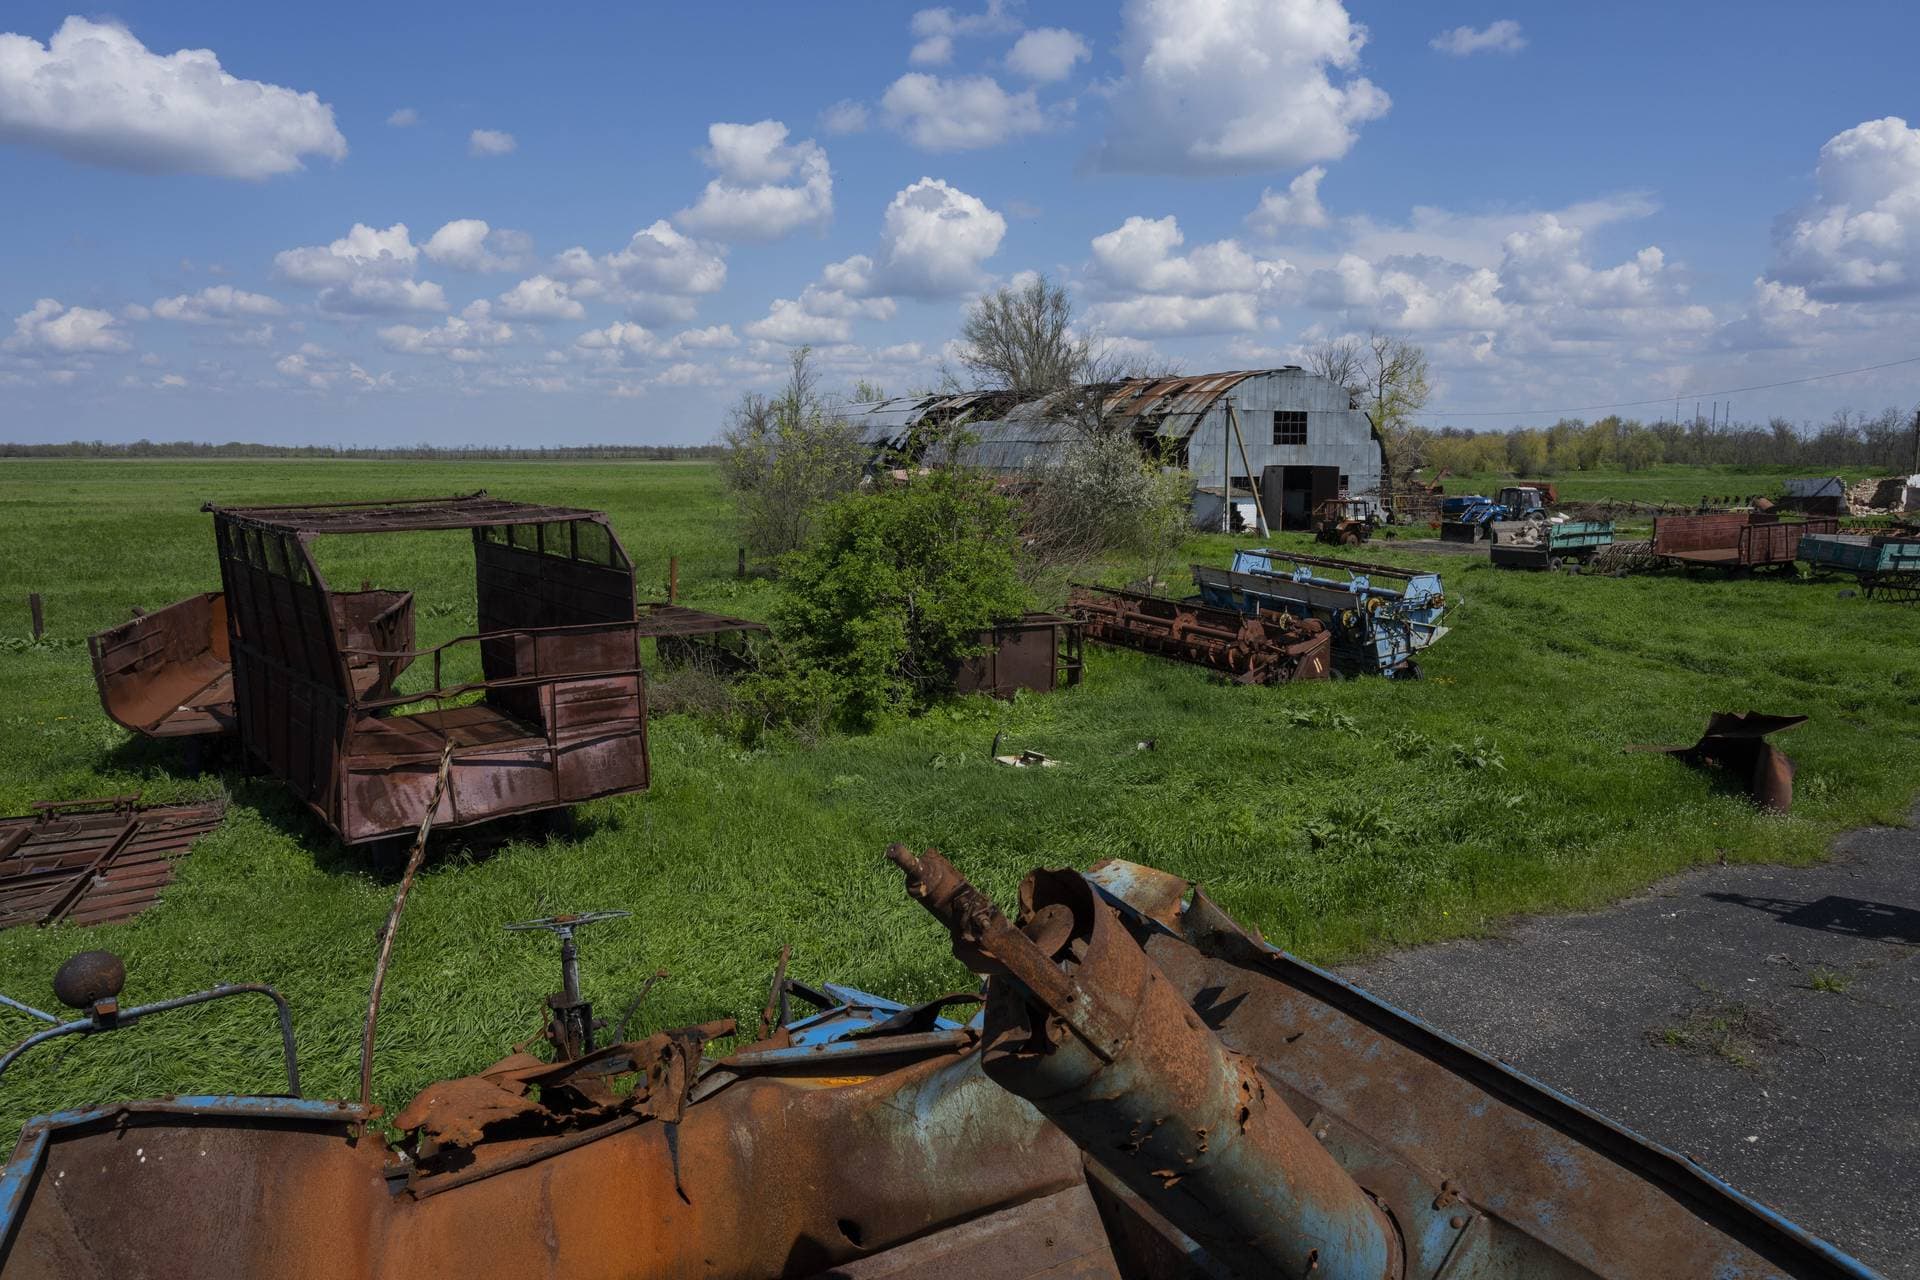 Destroyed farm machinery and warehouse in Potomkyne village